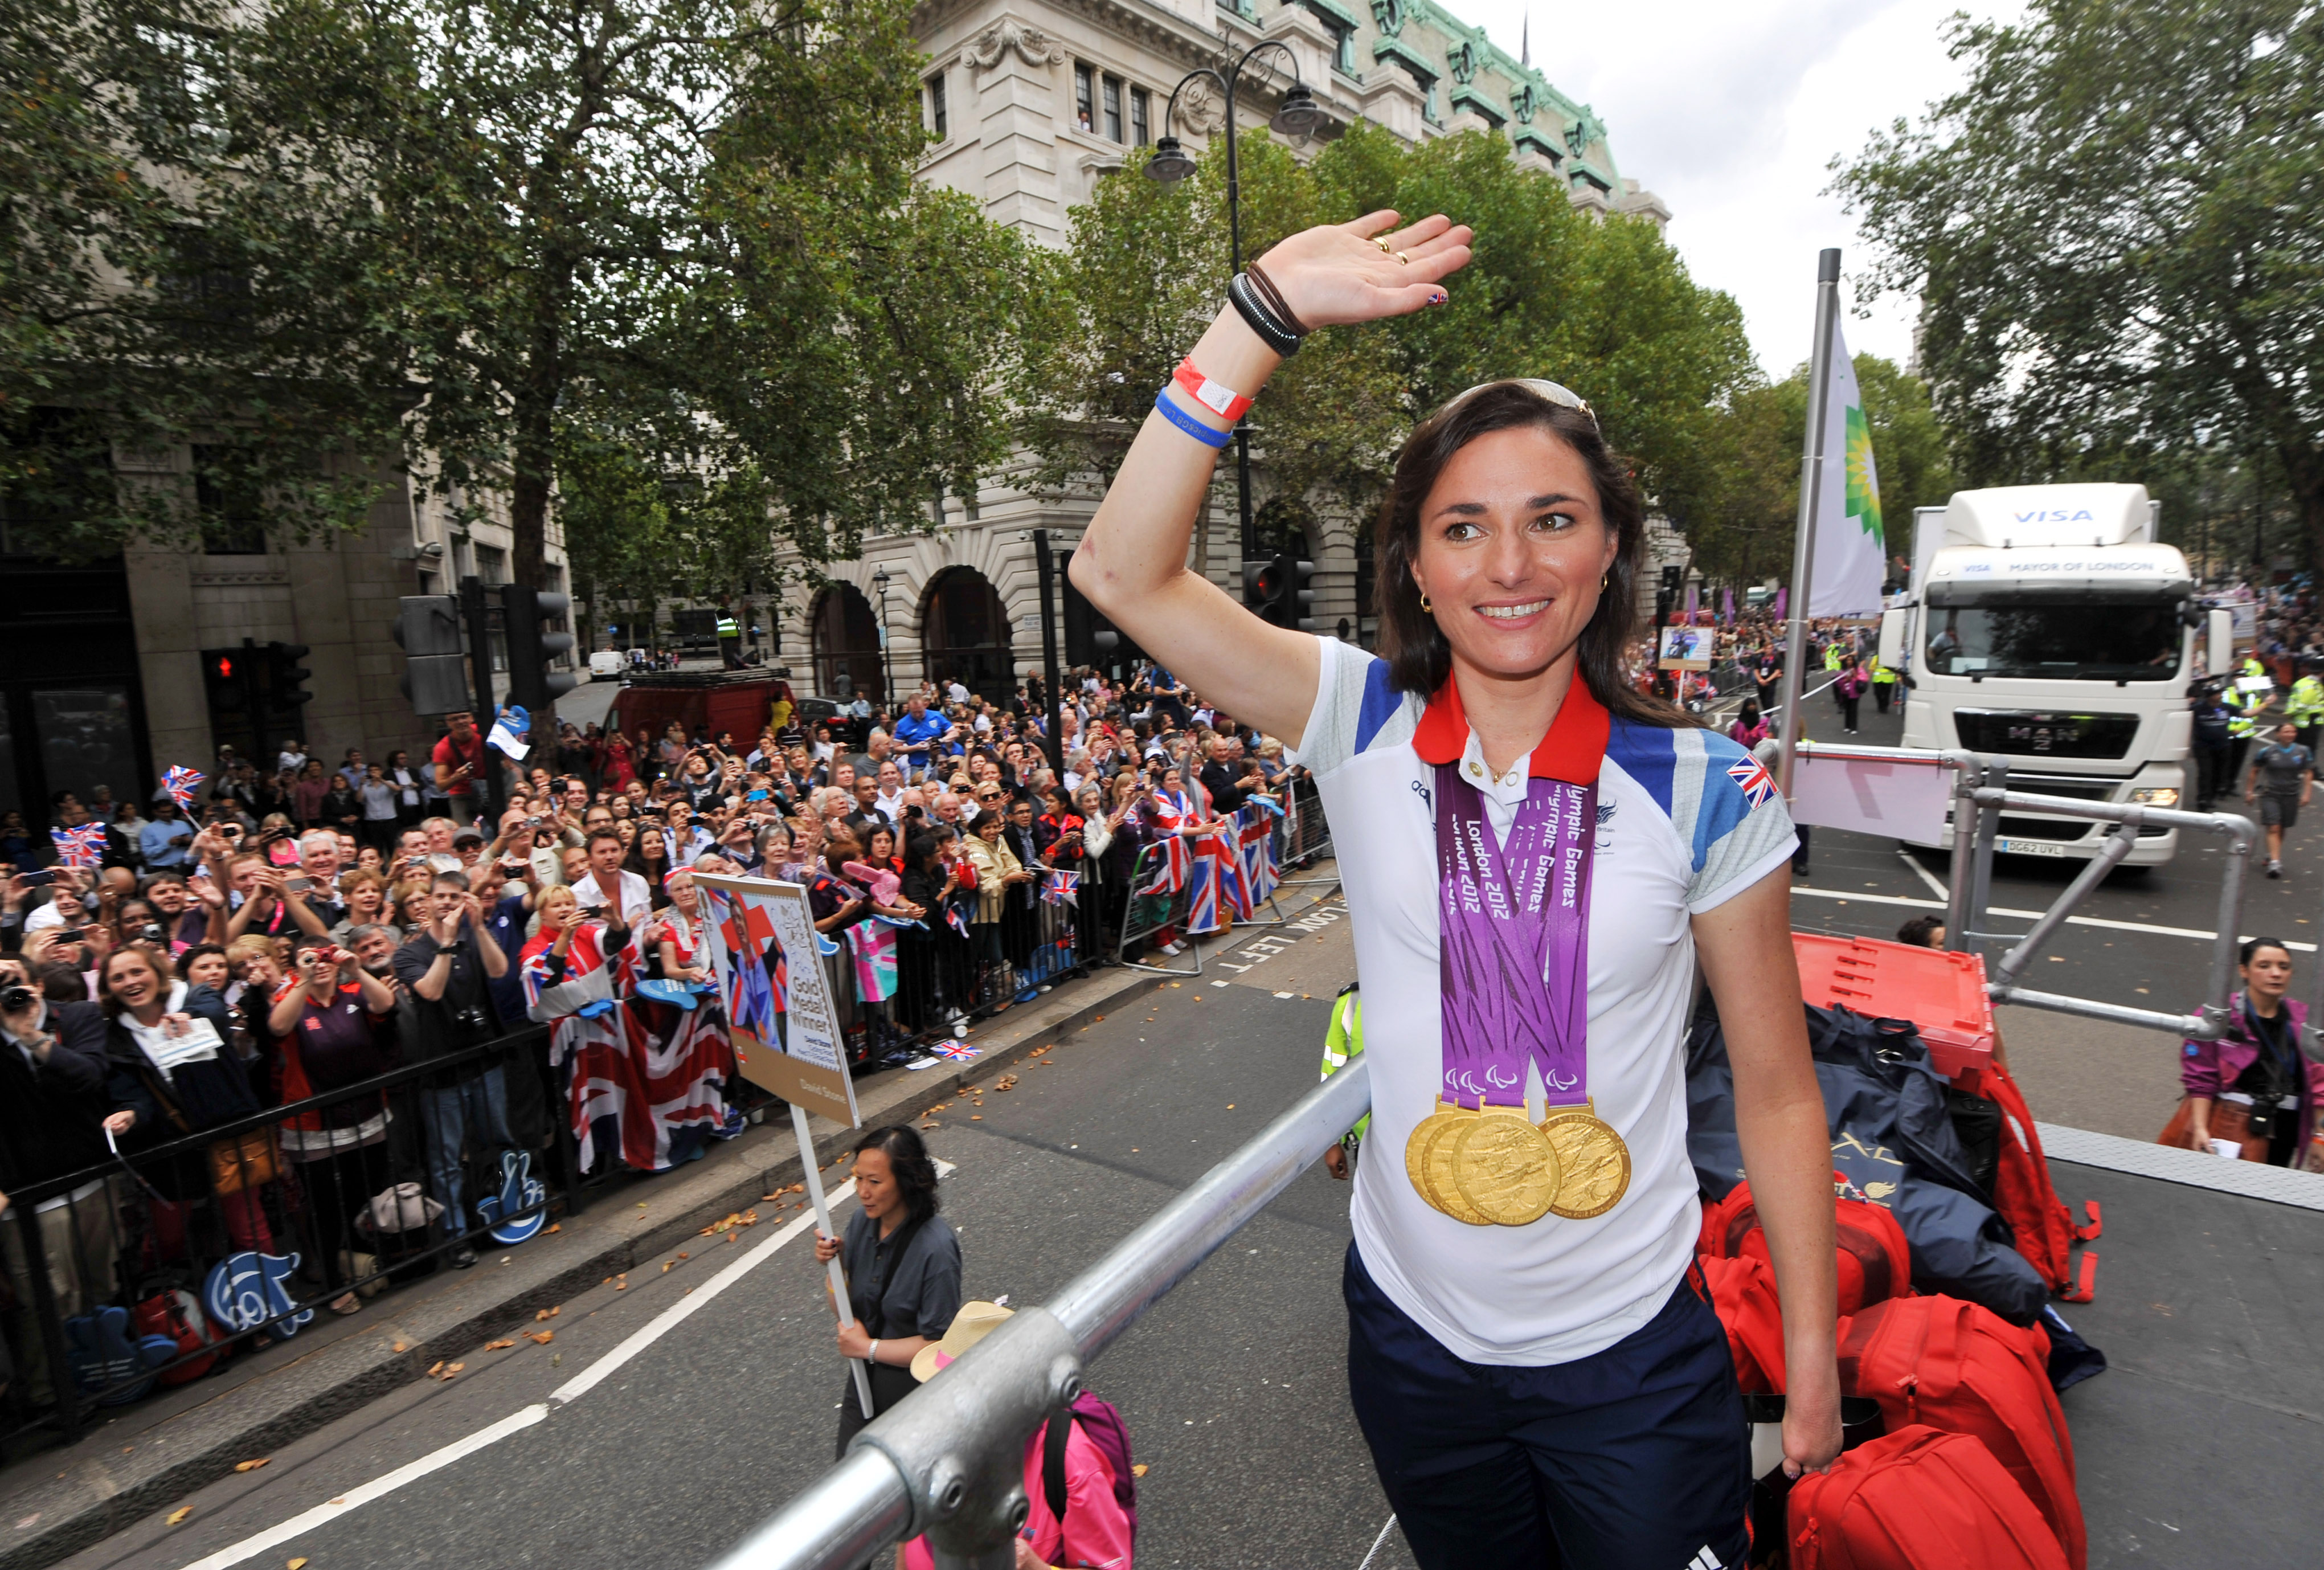 One year on: Sarah Storey becomes a mother | International ...